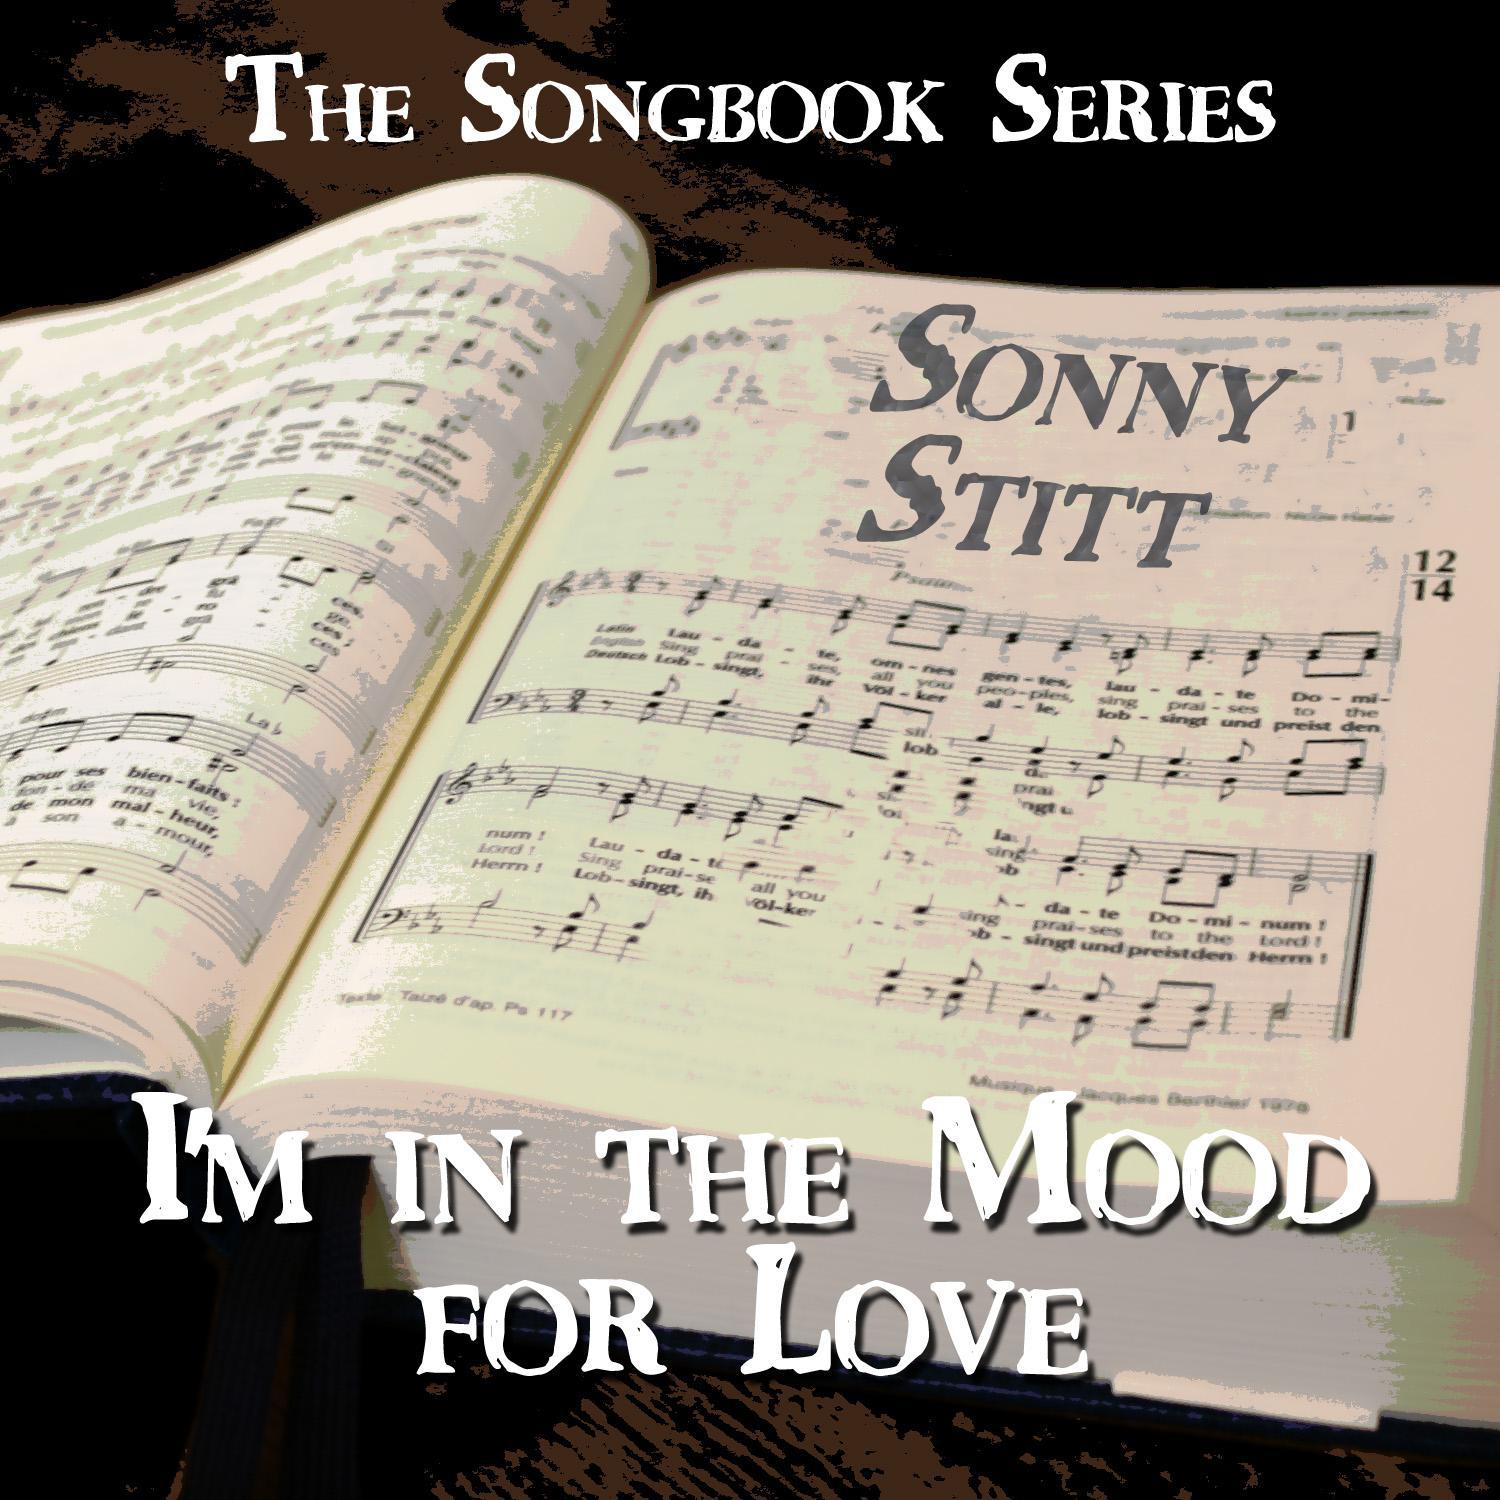 The Songbook Series - I'm in the Mood for Love